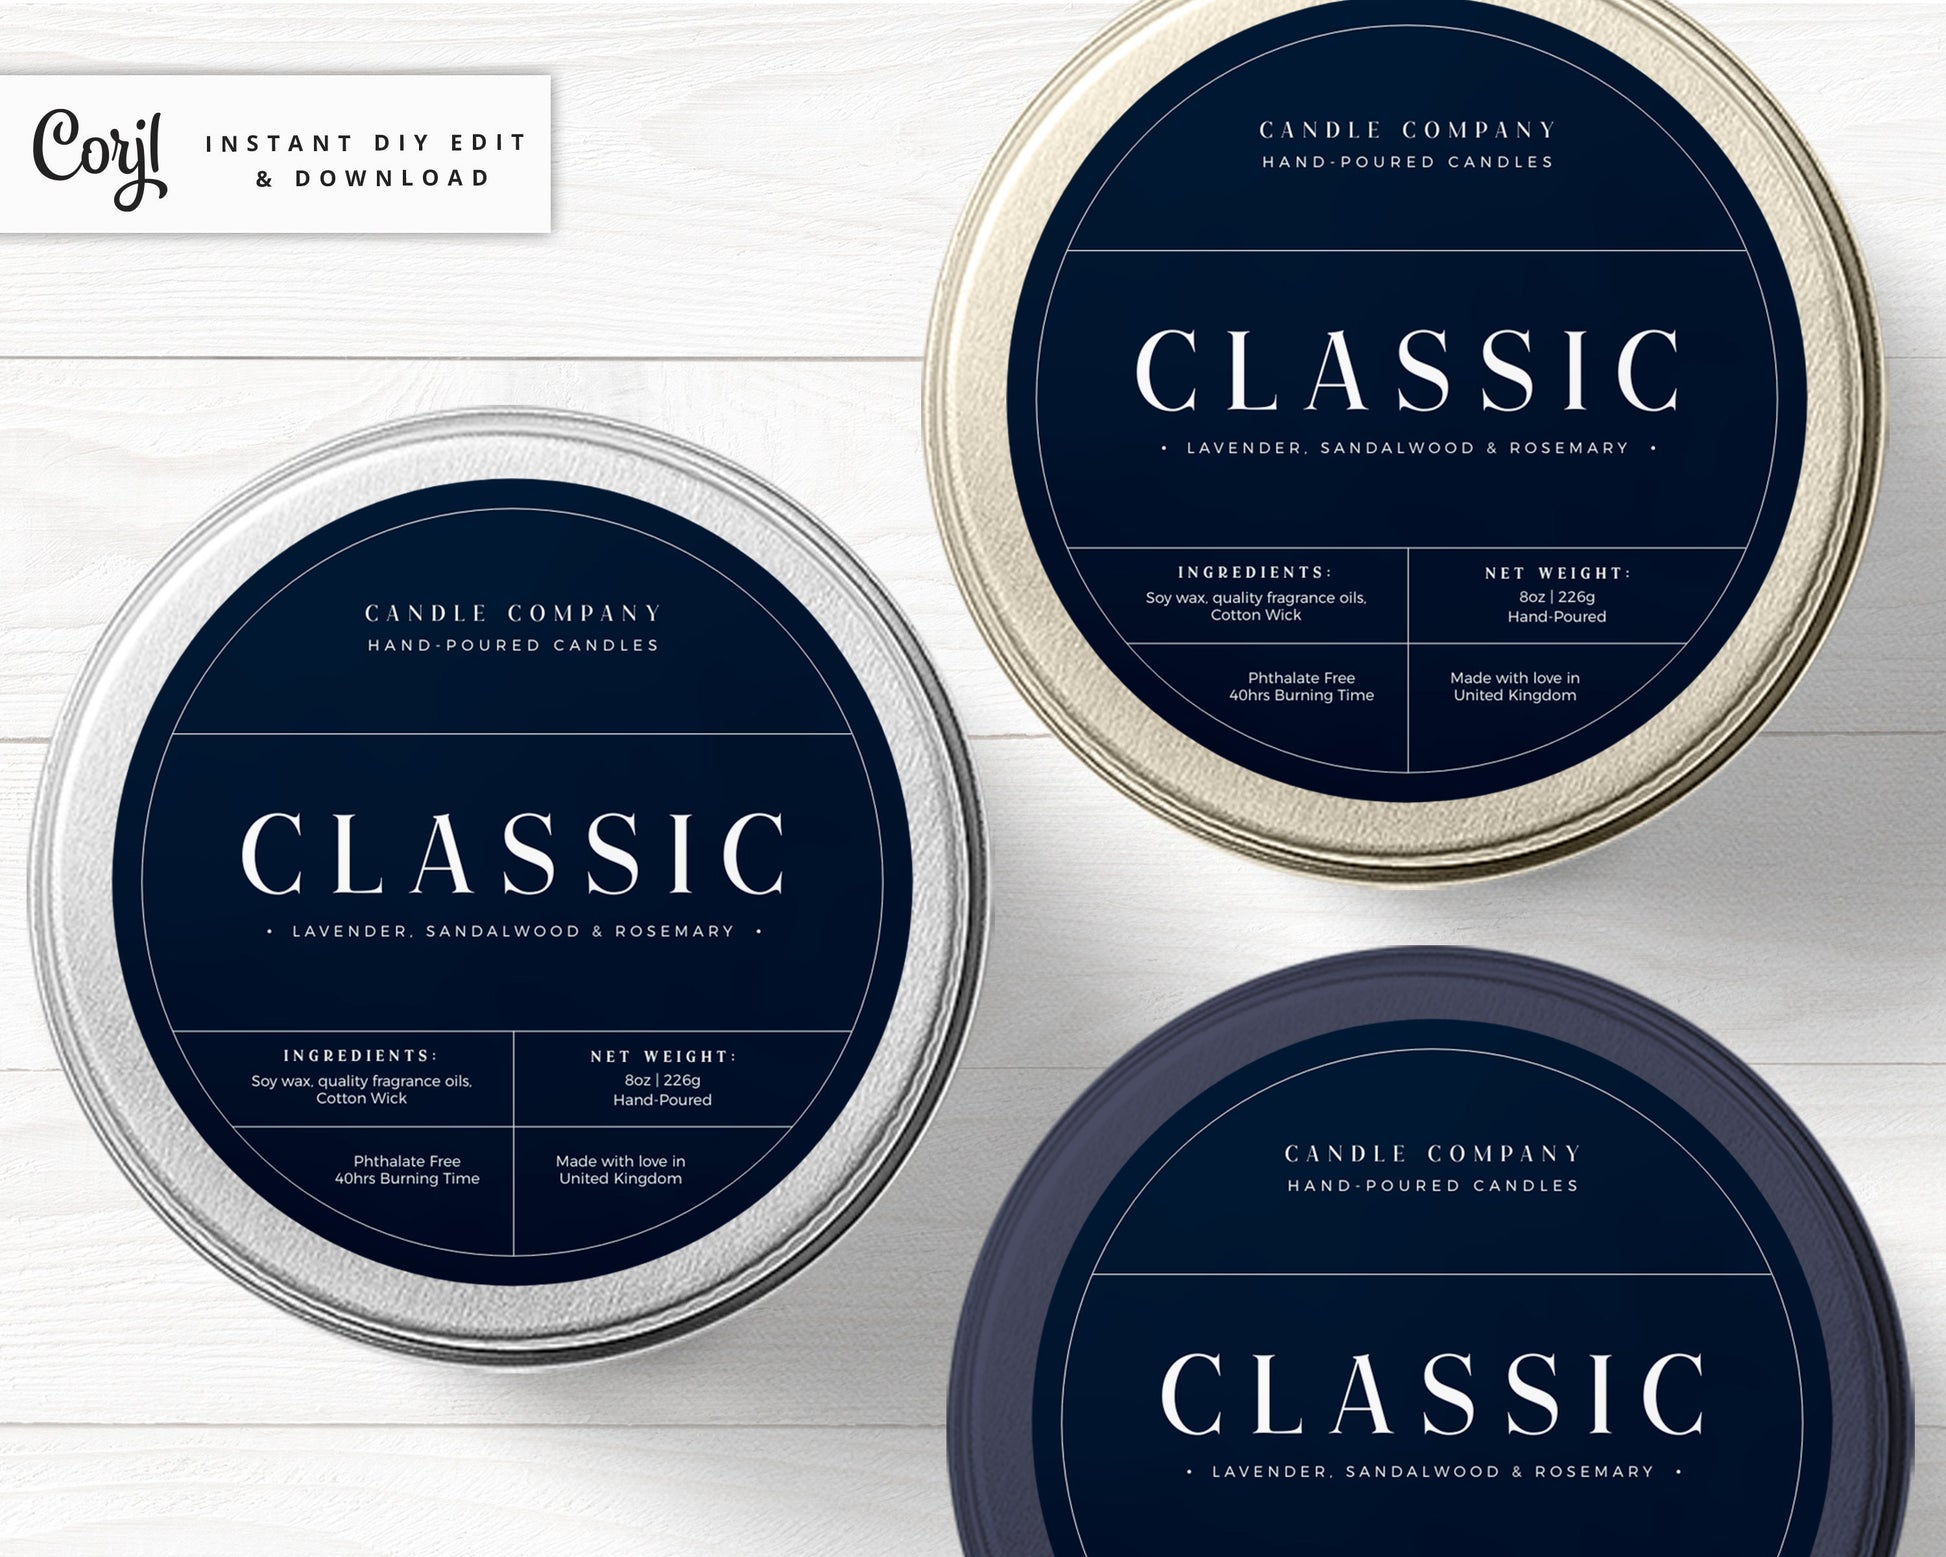 Soy Candle Labels Editable Label Product Label Template DIY Label